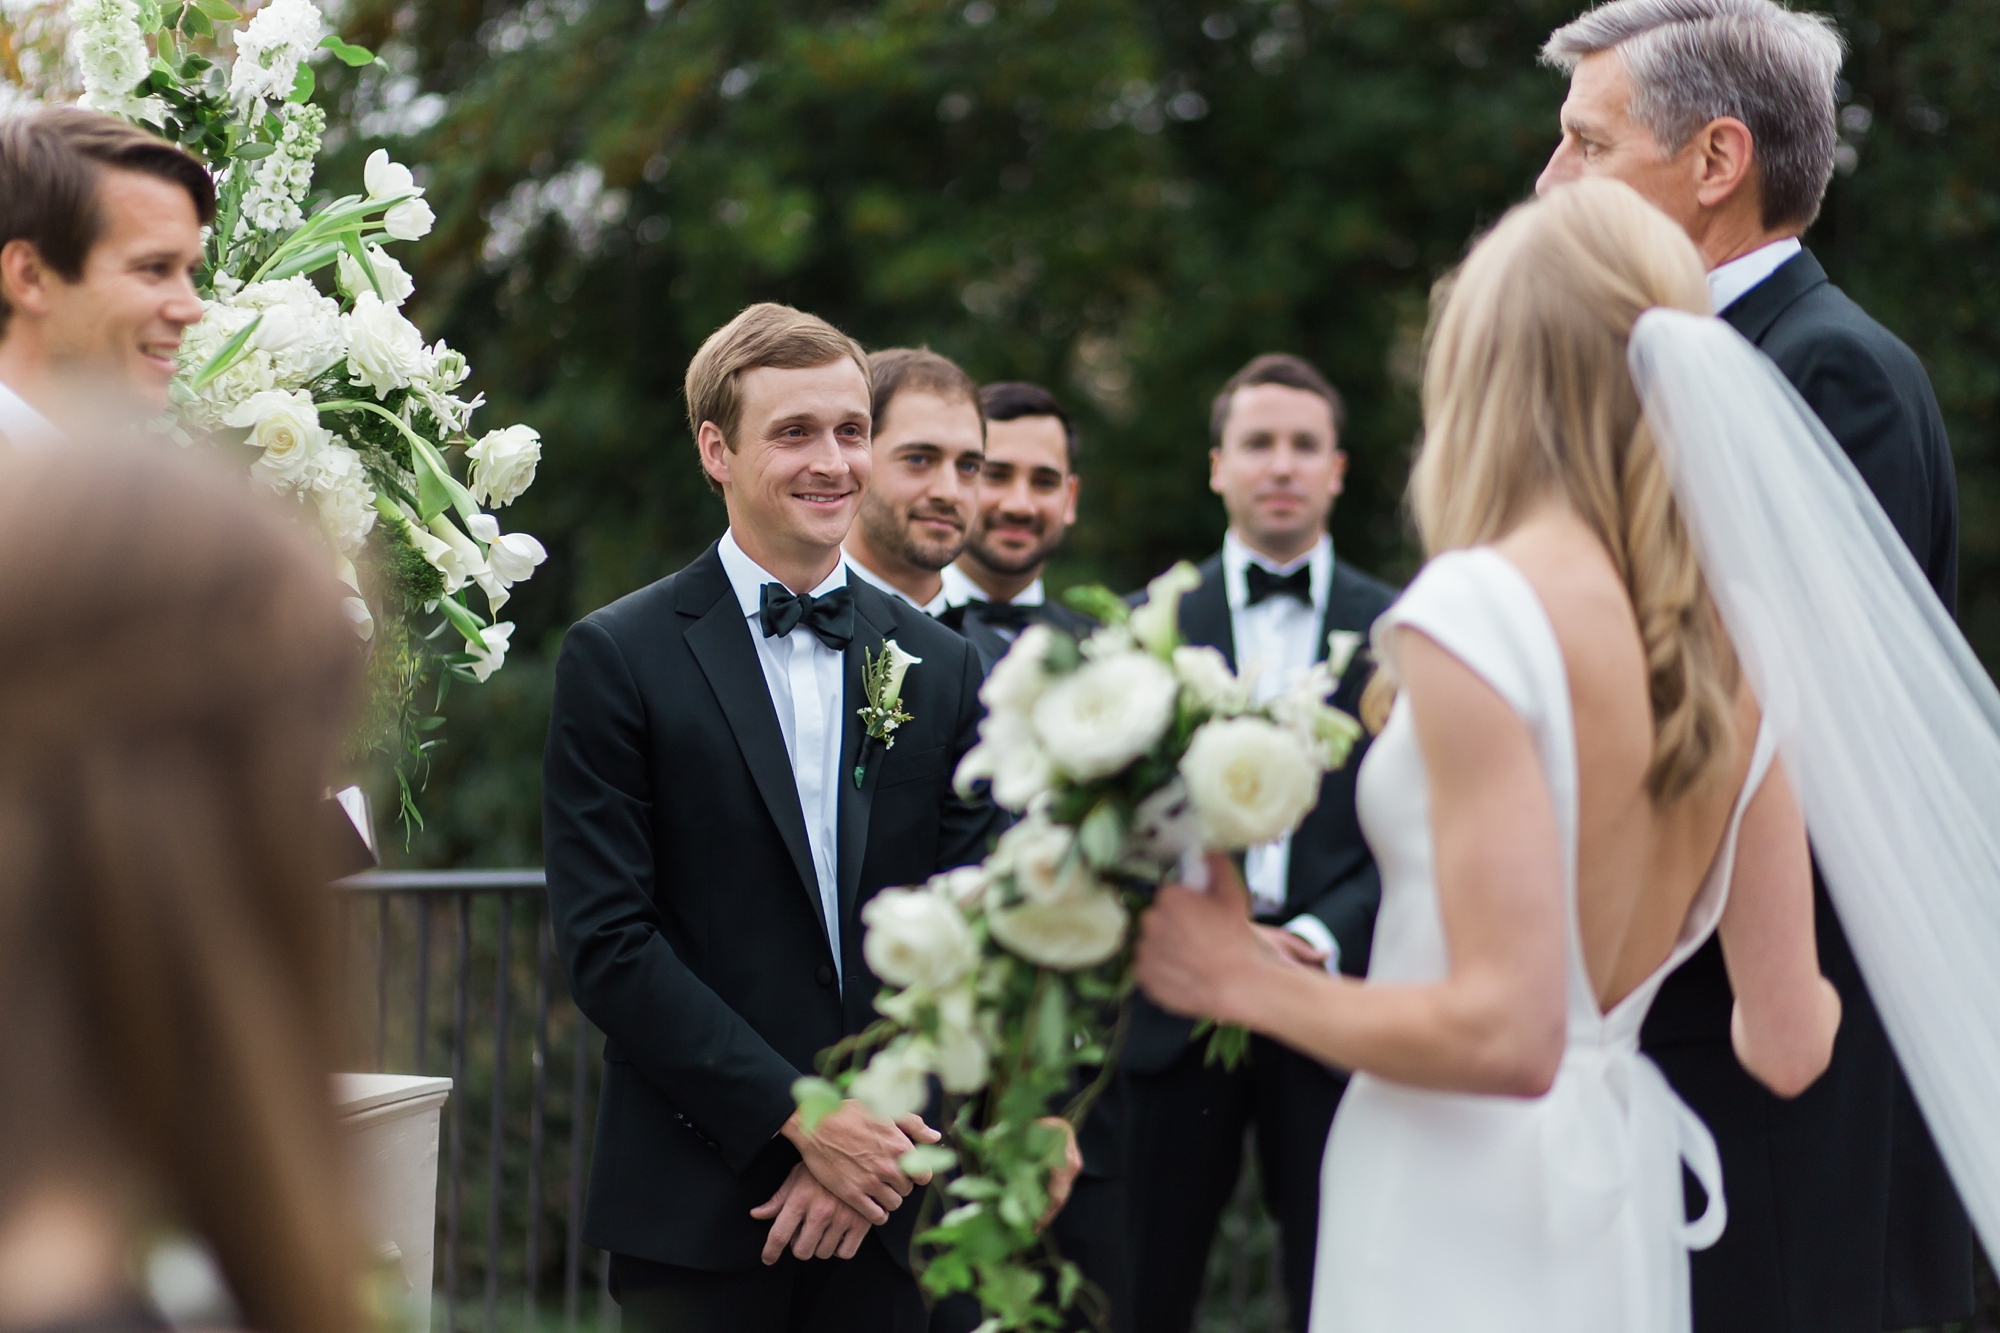 Black tie wedding ceremony at East Lake Golf Club by Atlanta's top wedding photographers Leigh and Becca